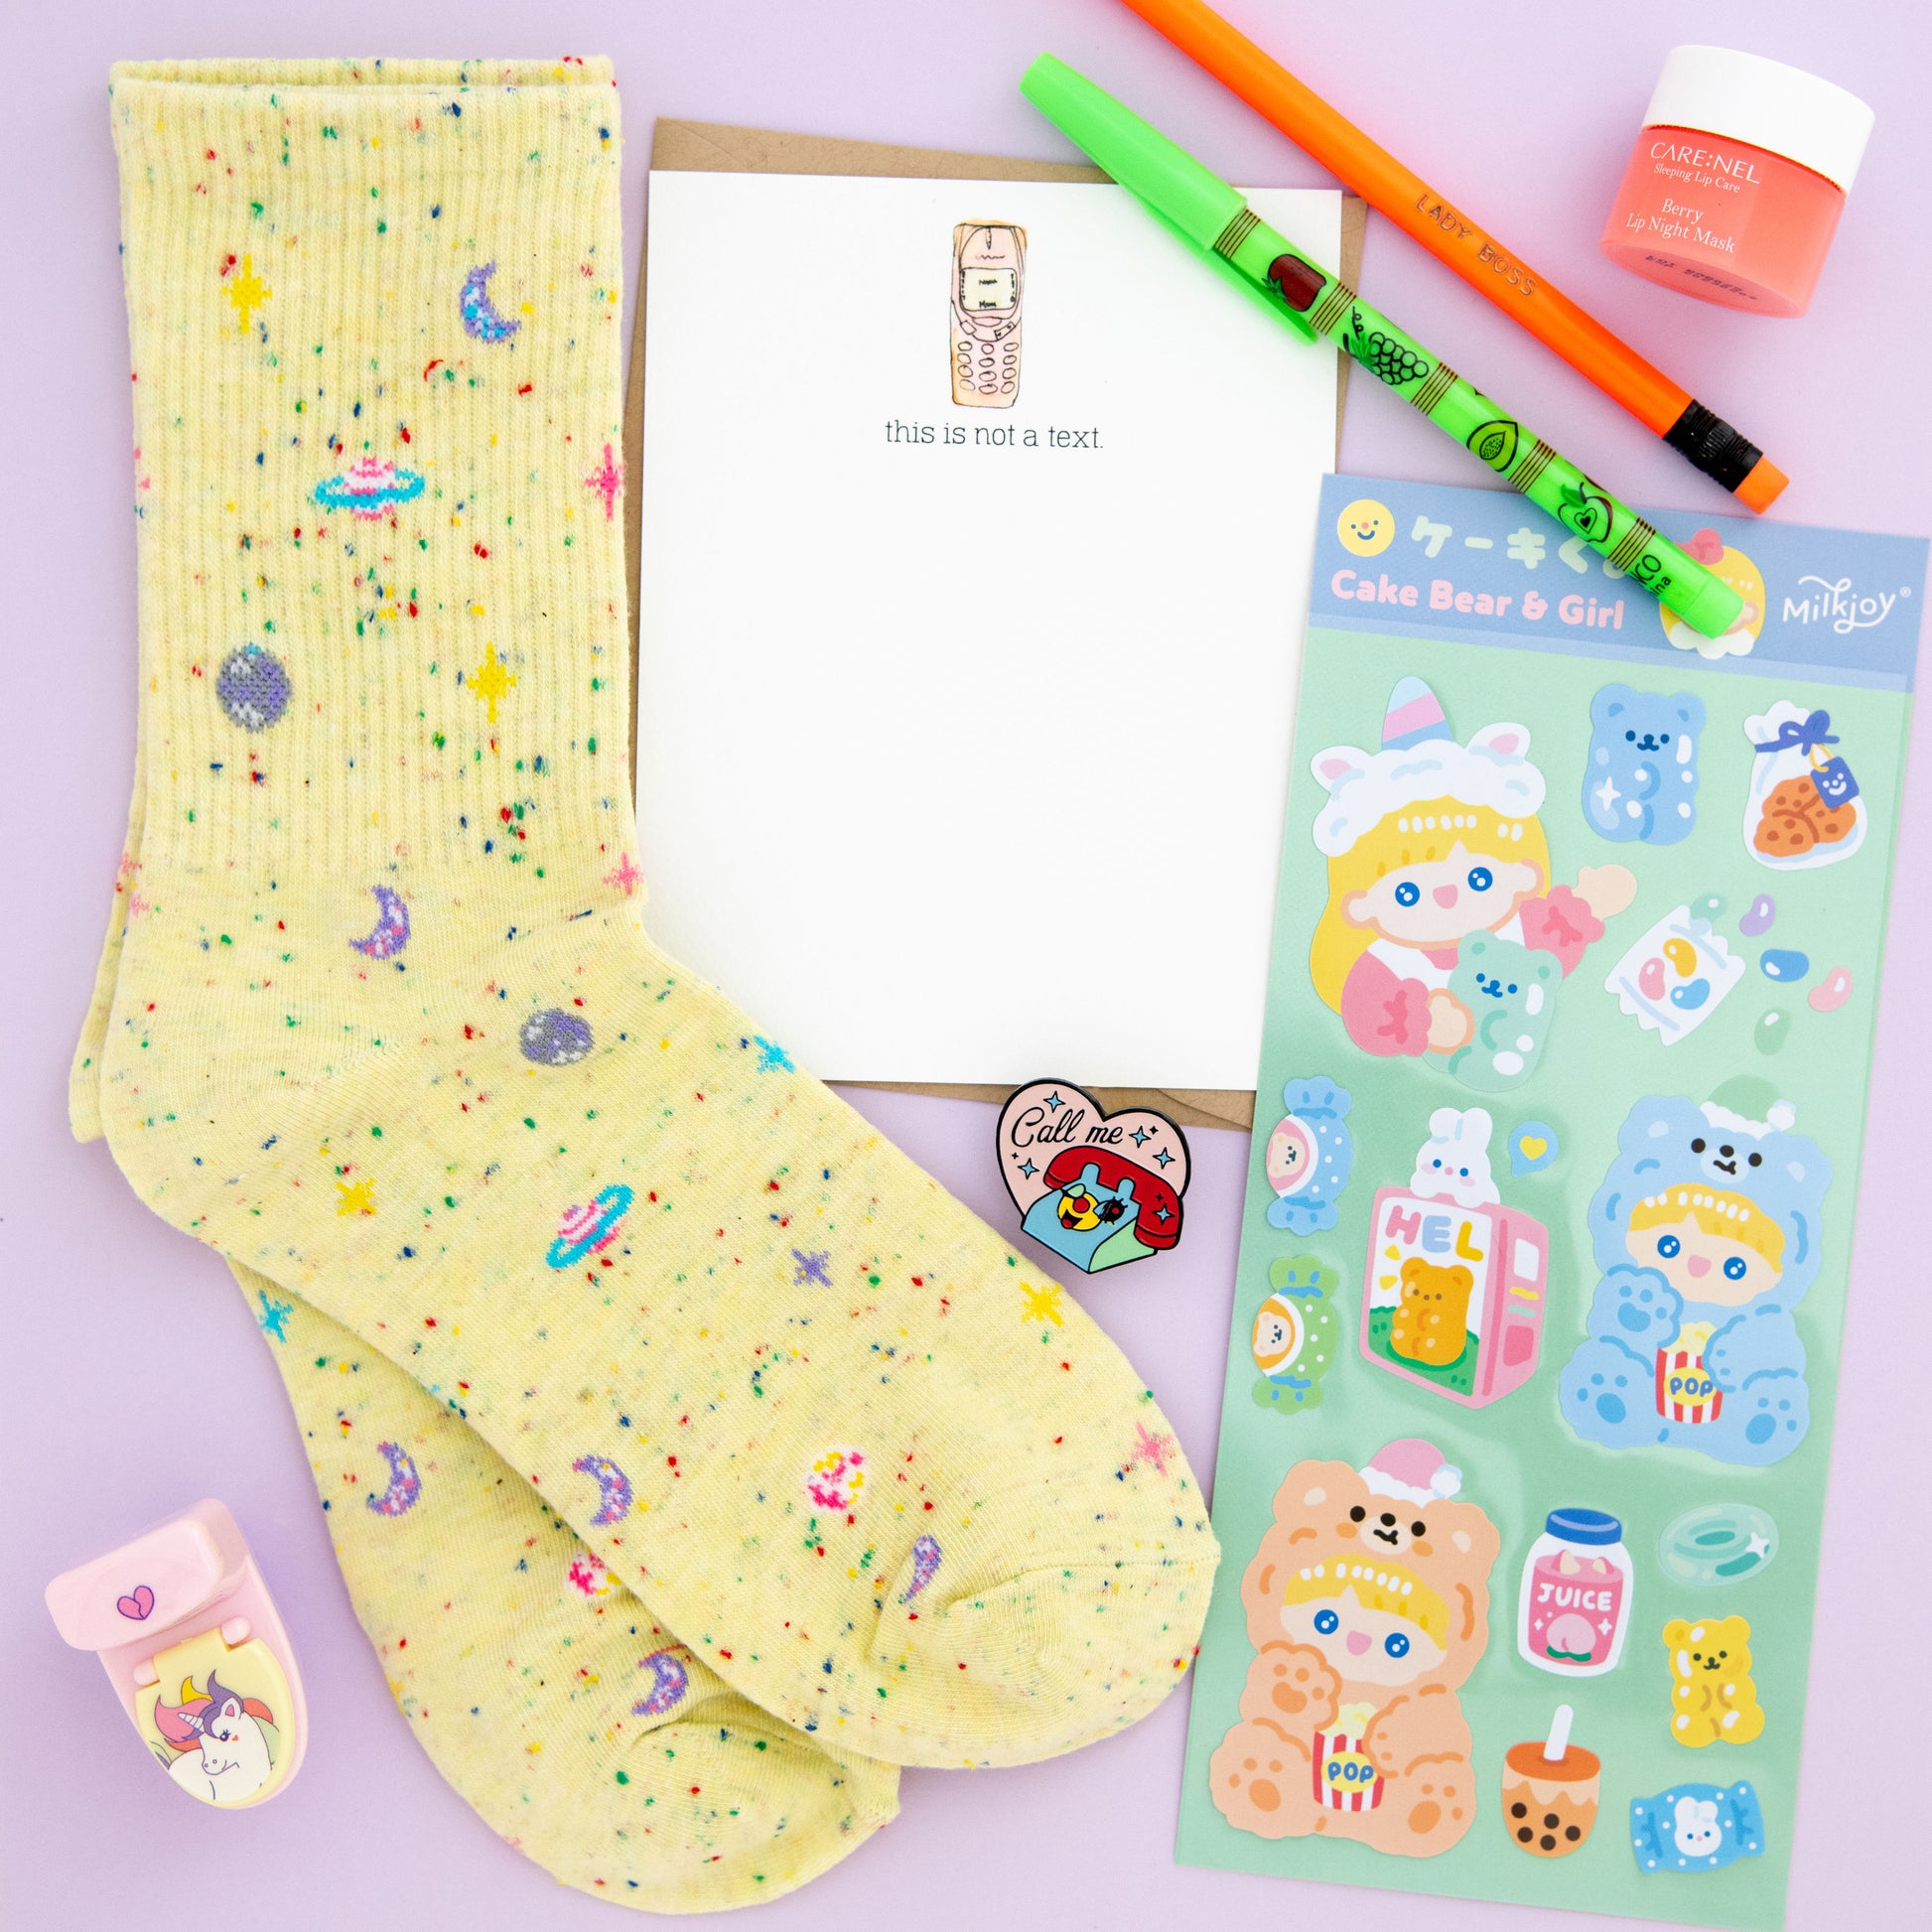 Unleash your inner creativity and imagination with The Oddball Club's unique and quirky subscription box filled with planet-themed socks, a call me enamel nostalgic pin, a cute 'This Is Not a Text' notecard, pop-a-point pencils, adorable cake bear and girl stickers, a kawaii unicorn toilet pencil sharpener, and a fun Ratbone skinny pencil. Order now to experience the perfect blend of fun and functionality!